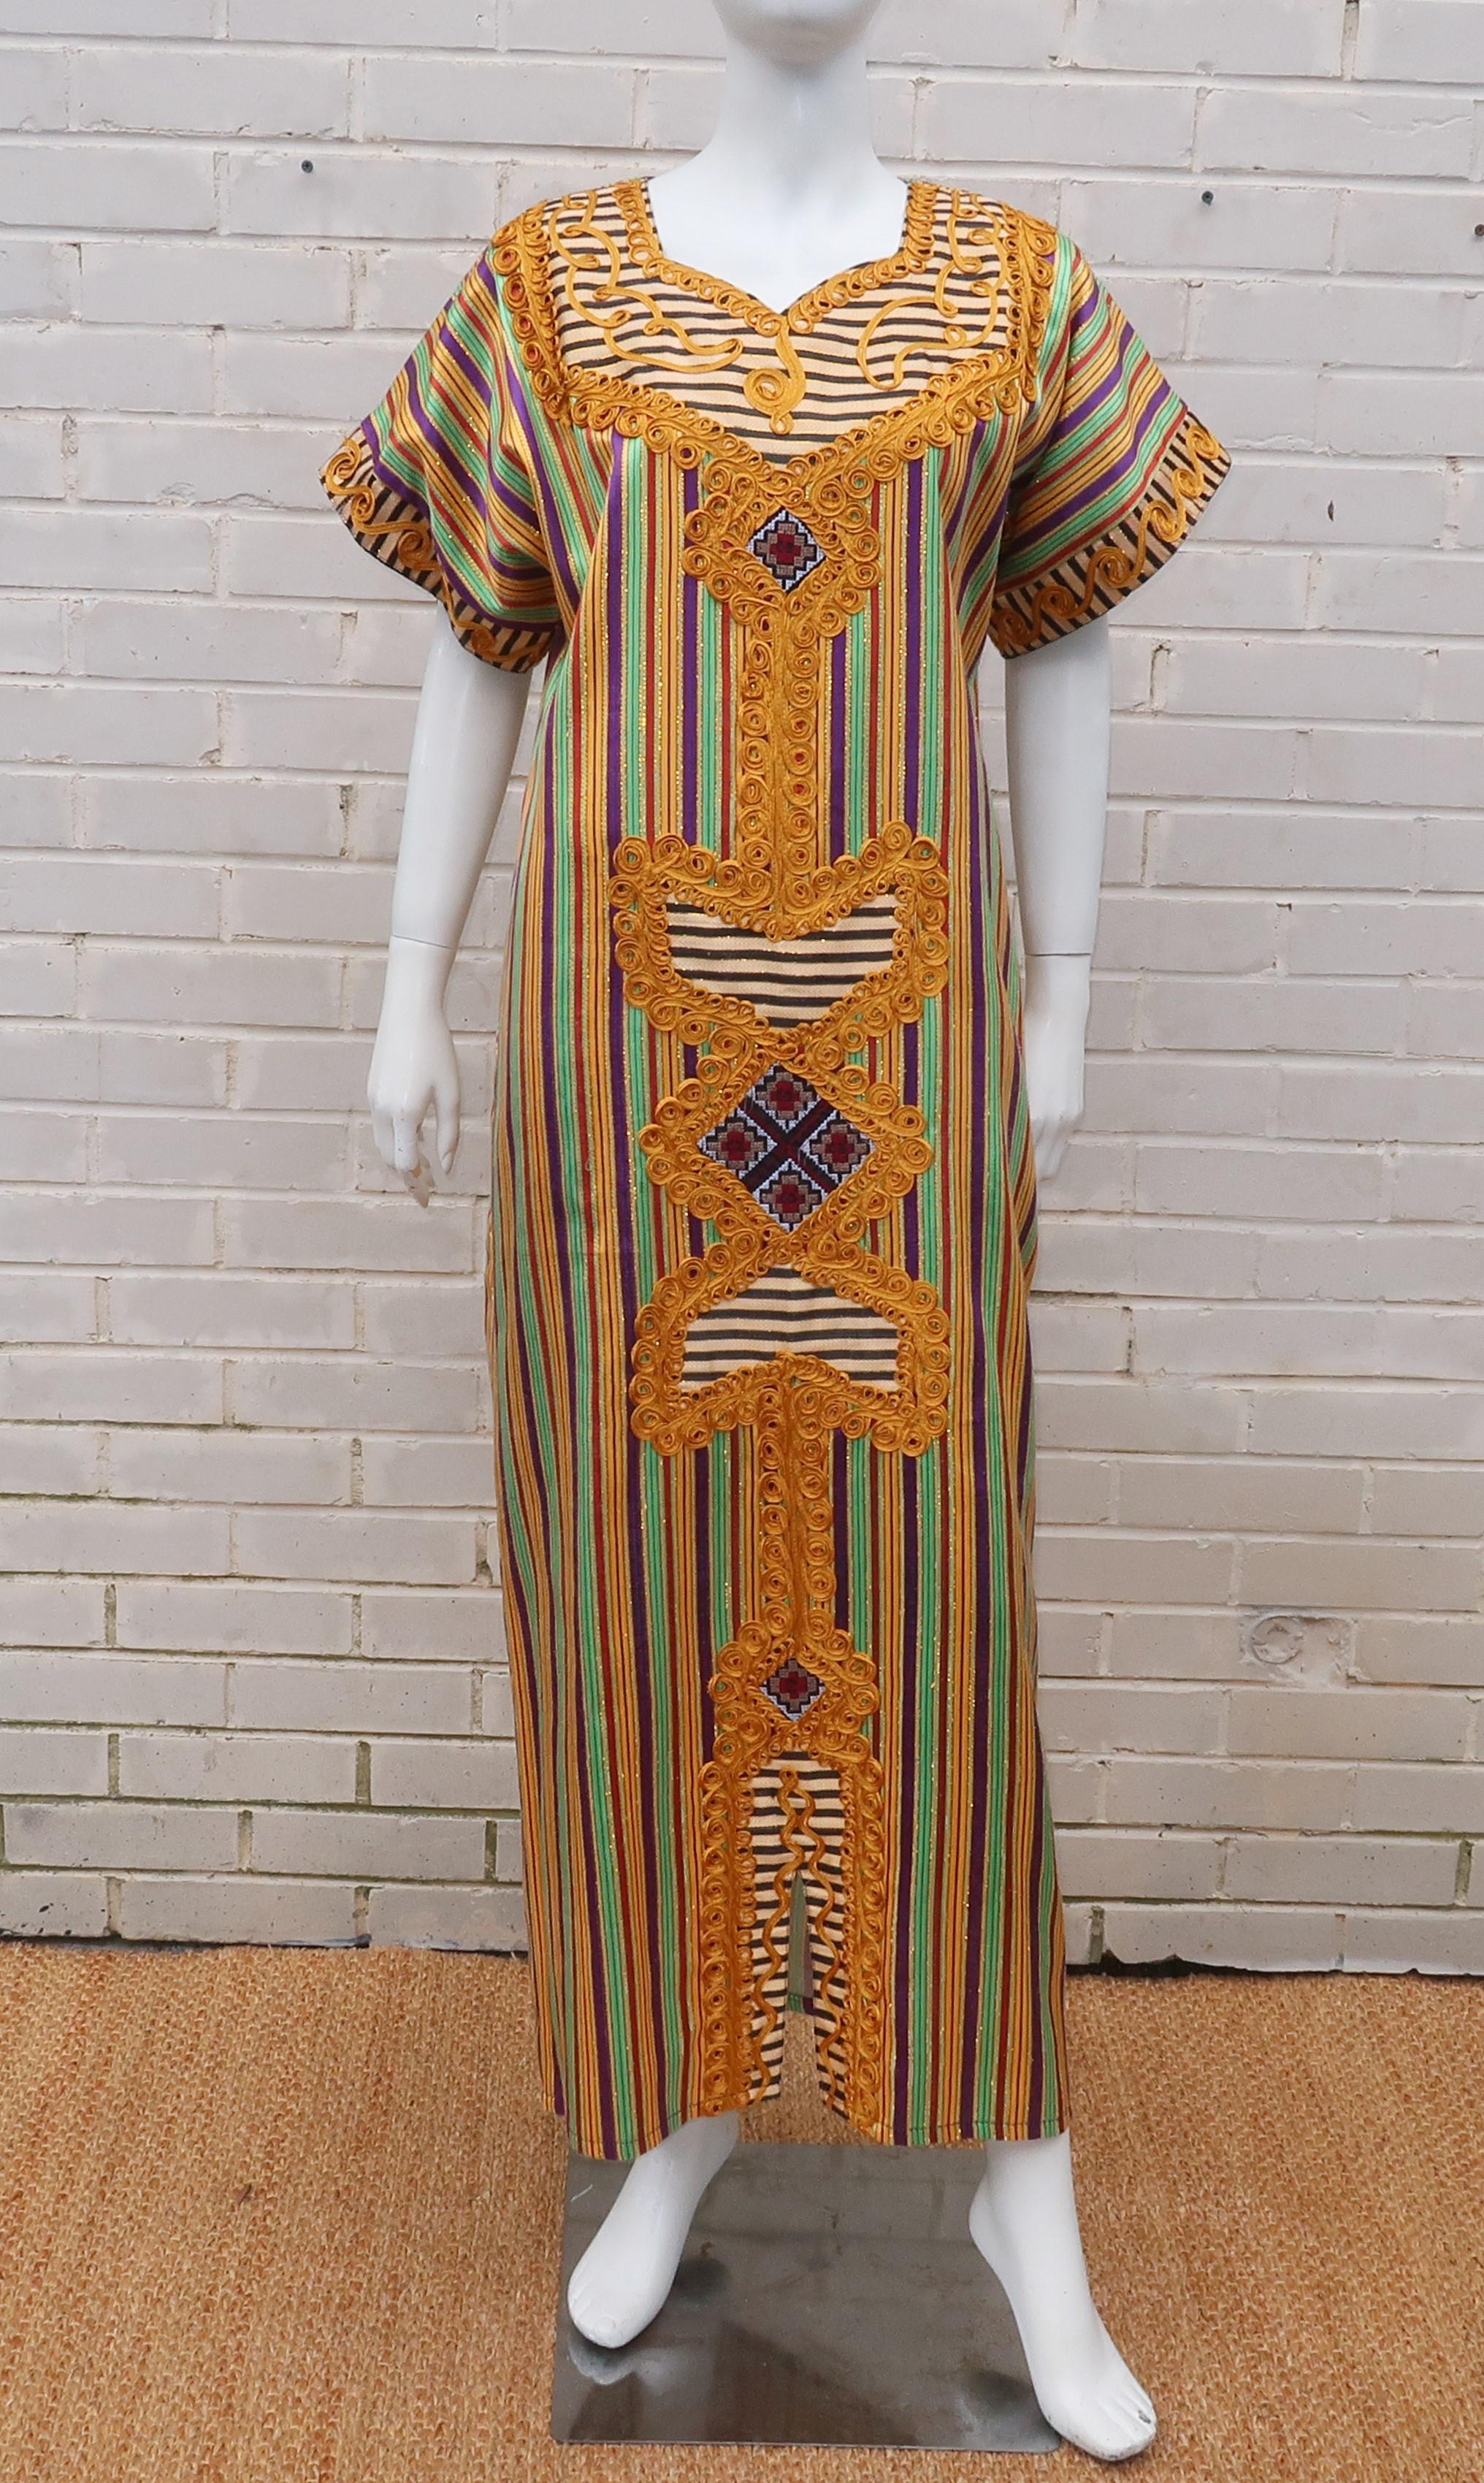 Relax like the Queen of the Nile in this exotic Egyptian caftan dress.  The rich heavy cotton fabric has a sateen finish in vibrant stripes of yellow, green, purple and red with gold metallic threading throughout.  The bib, front panel and sleeve